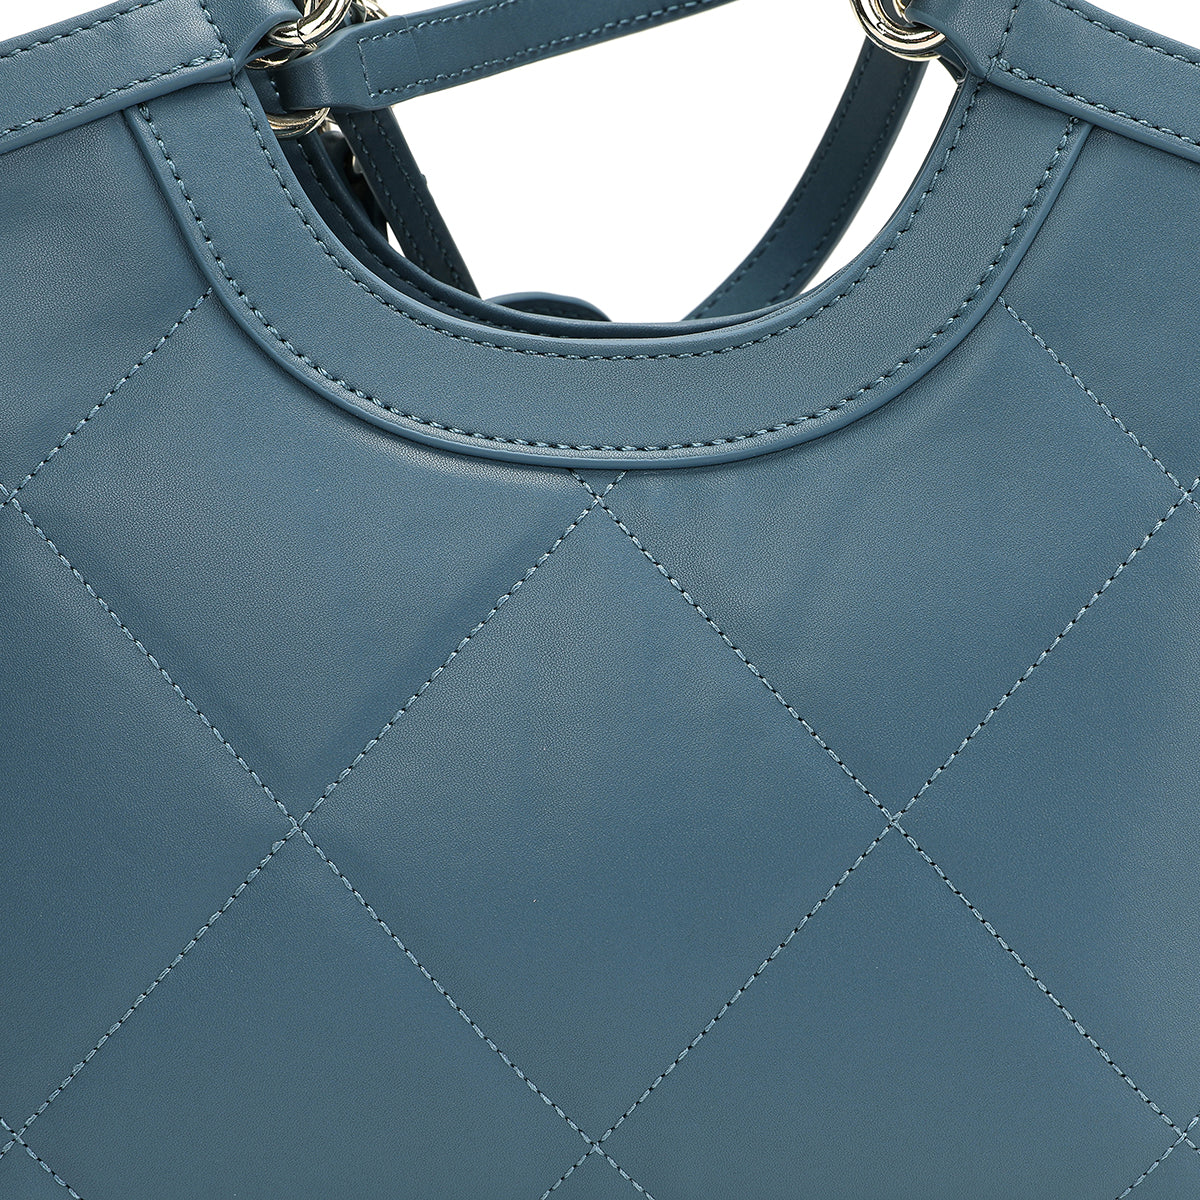 Luxury leather bag with a distinctive handle and light size, blue colour